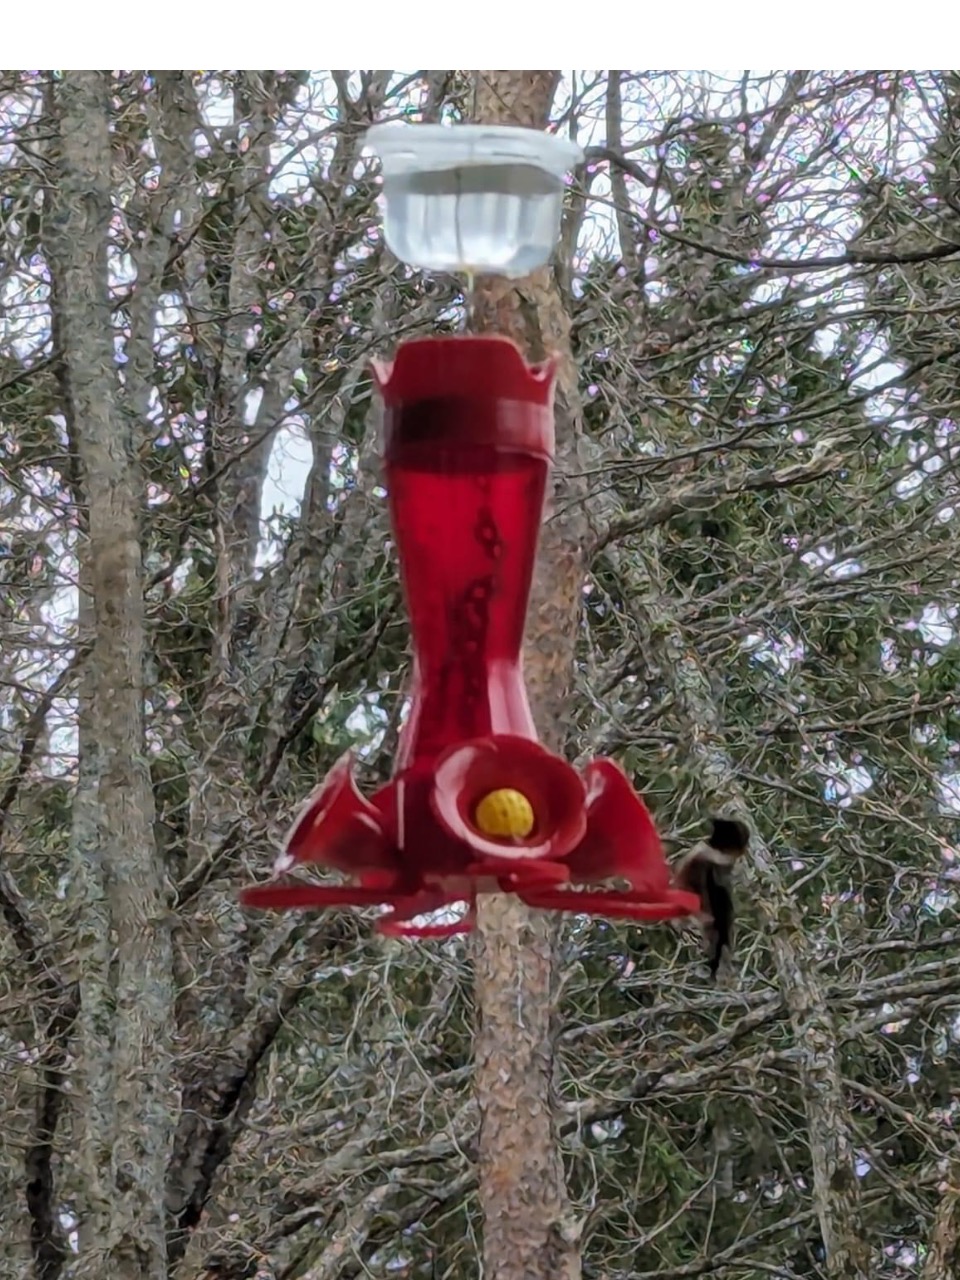 A hummingbird on a red feeder in front of trees